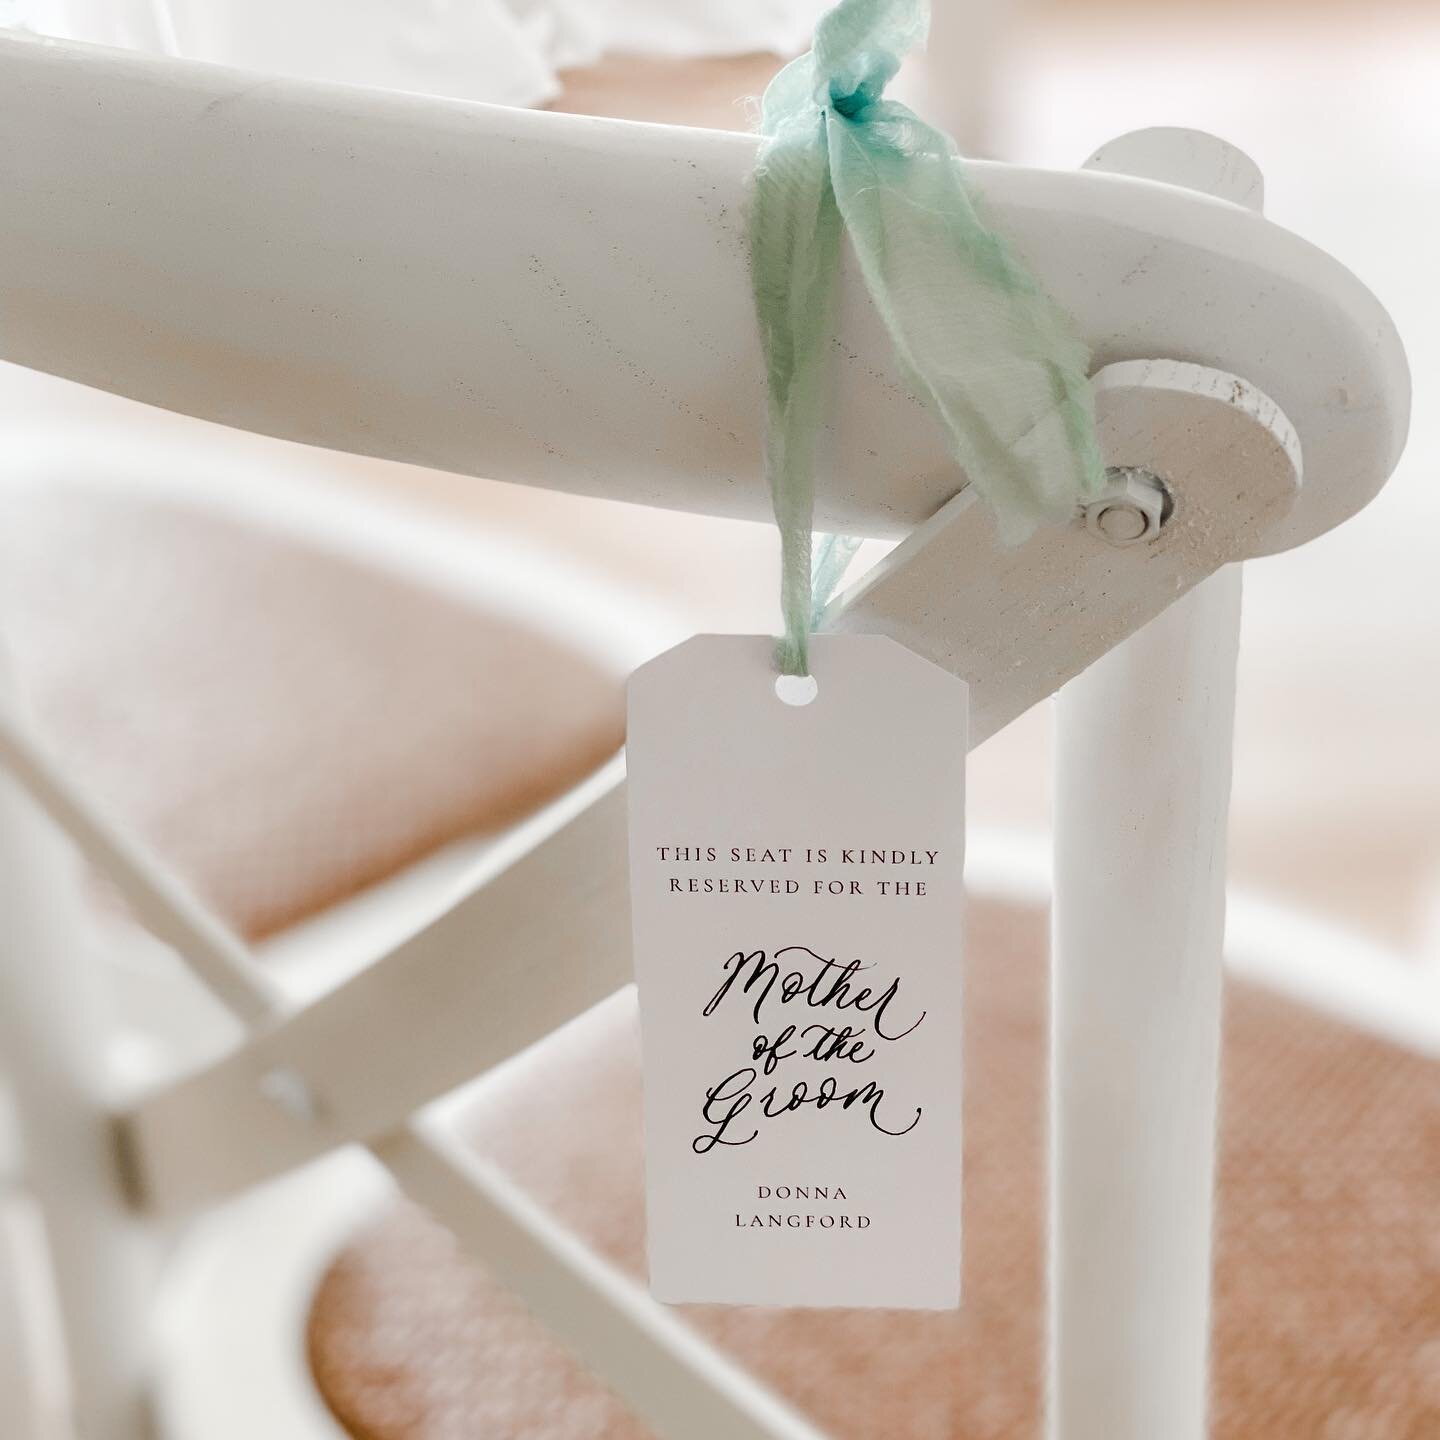 Reserved seating tags // a detail that&rsquo;s often forgotten, is that you may want to reserve some seats at your ceremony, to ensure your nearest and dearest have the best seats in the house 🥰 
.
.
.
.
.
#reservedtags #reservedseating #wedding #we